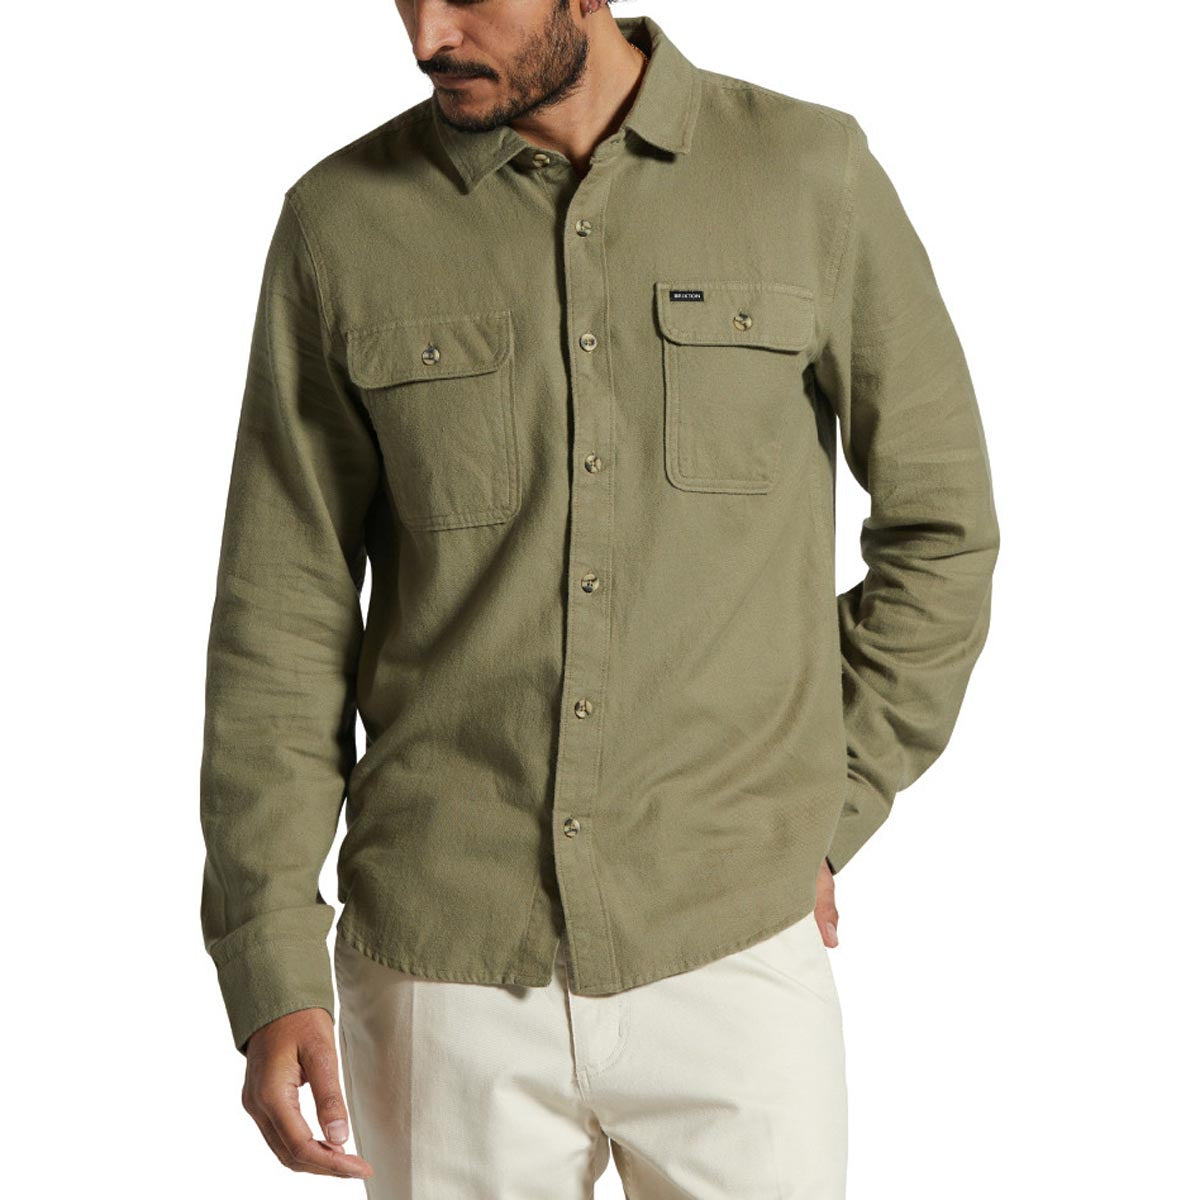 Brixton Bowery Lw Ultra Flannel Shirt - Olive Surplus image 1